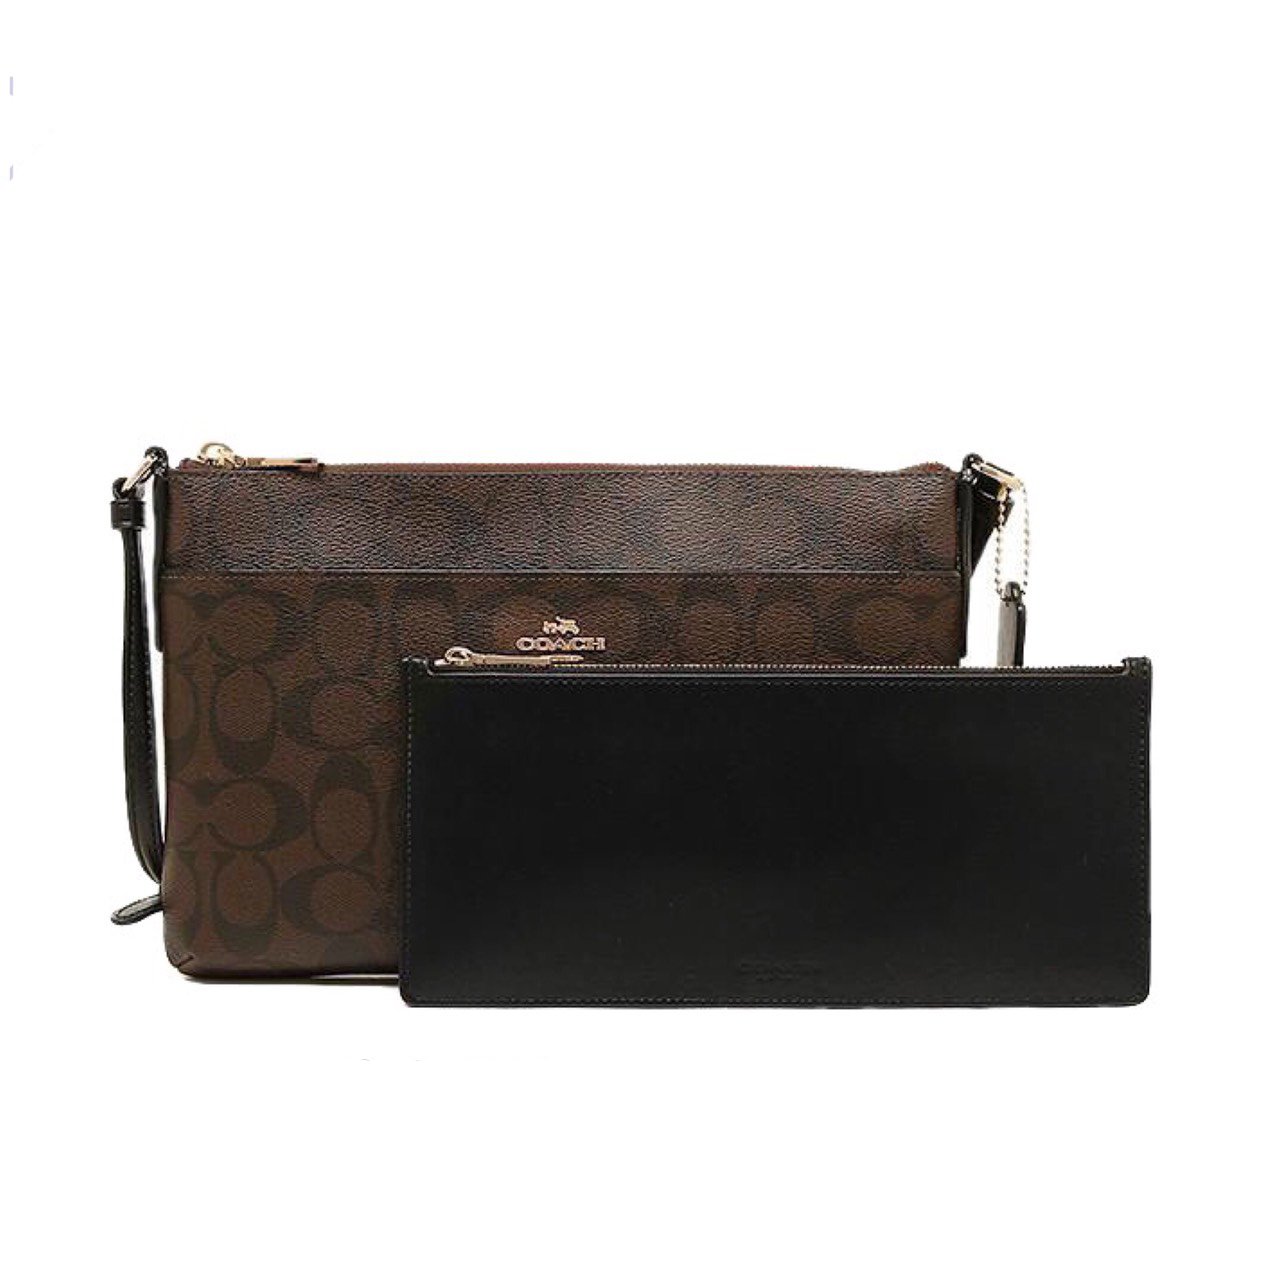 New Coach CrossbodyBag in Brown/Black Leather GHW